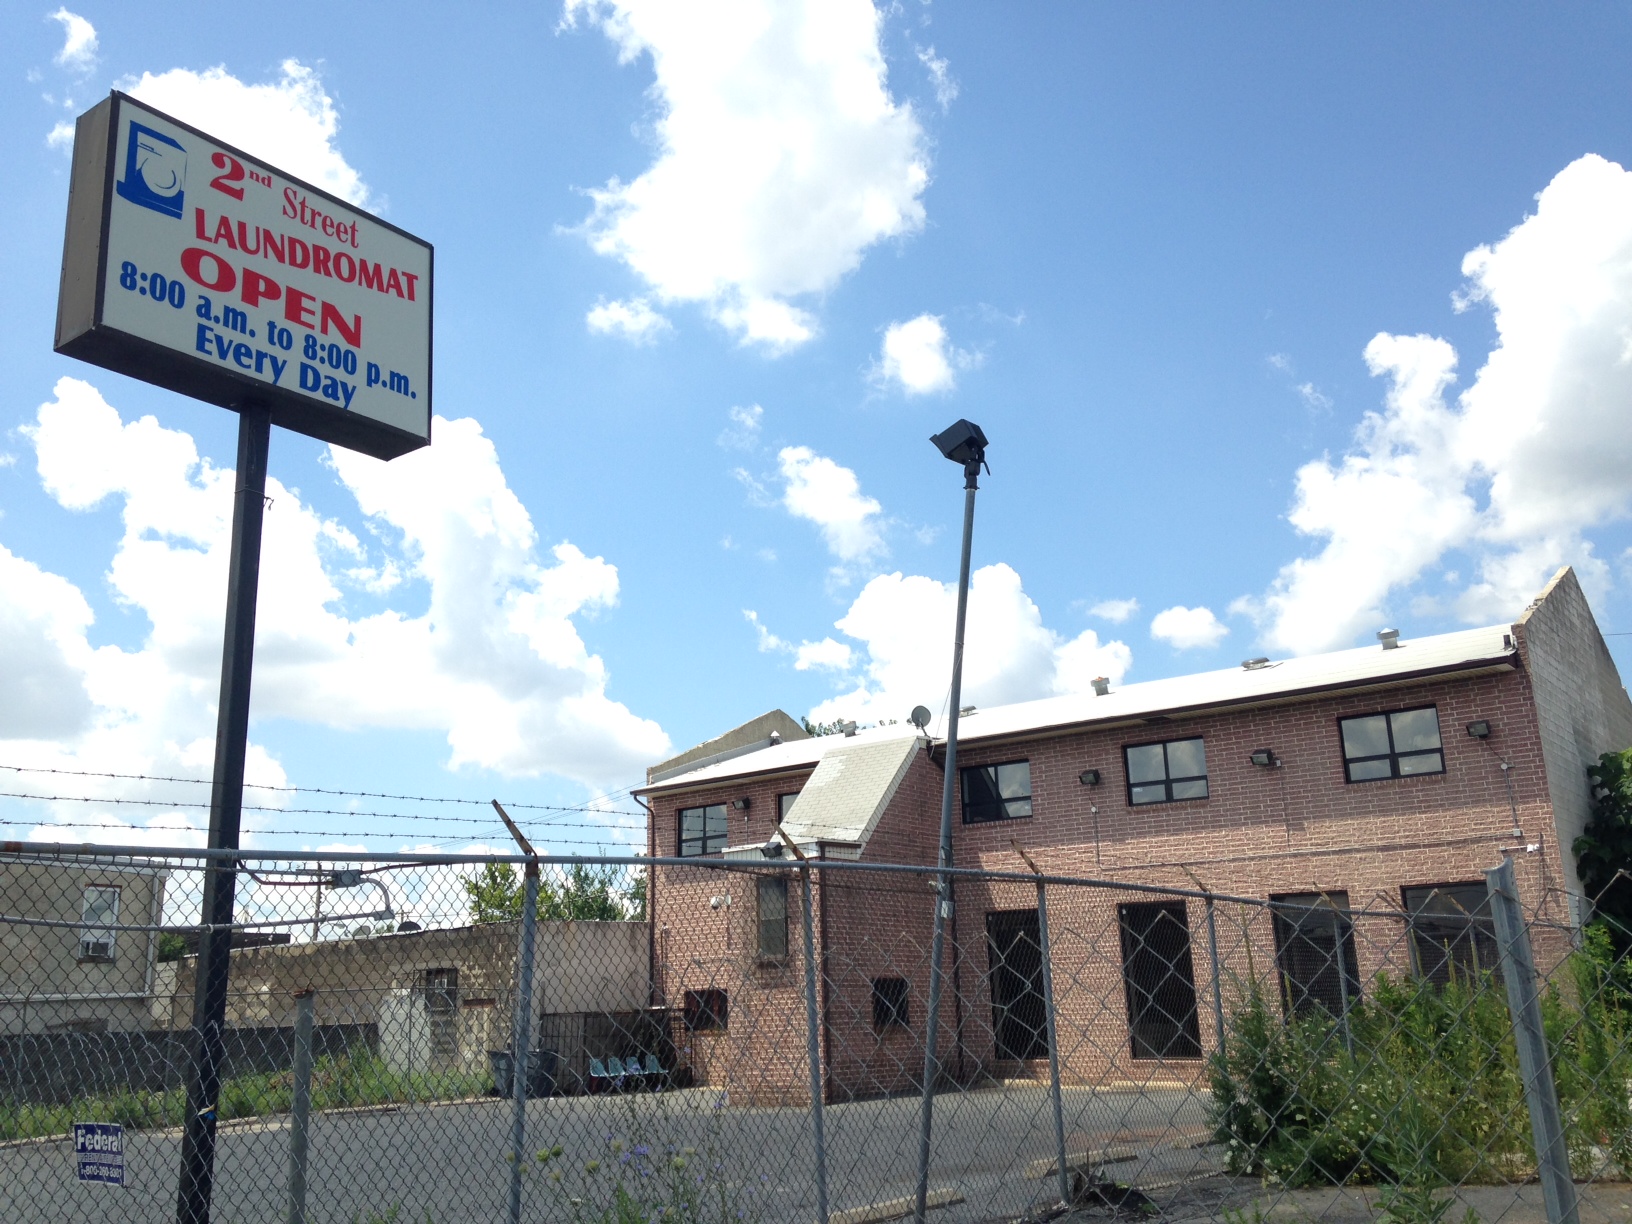 FINANTA CDC to Develop Affordable Commercial Properties in North Philadelphia